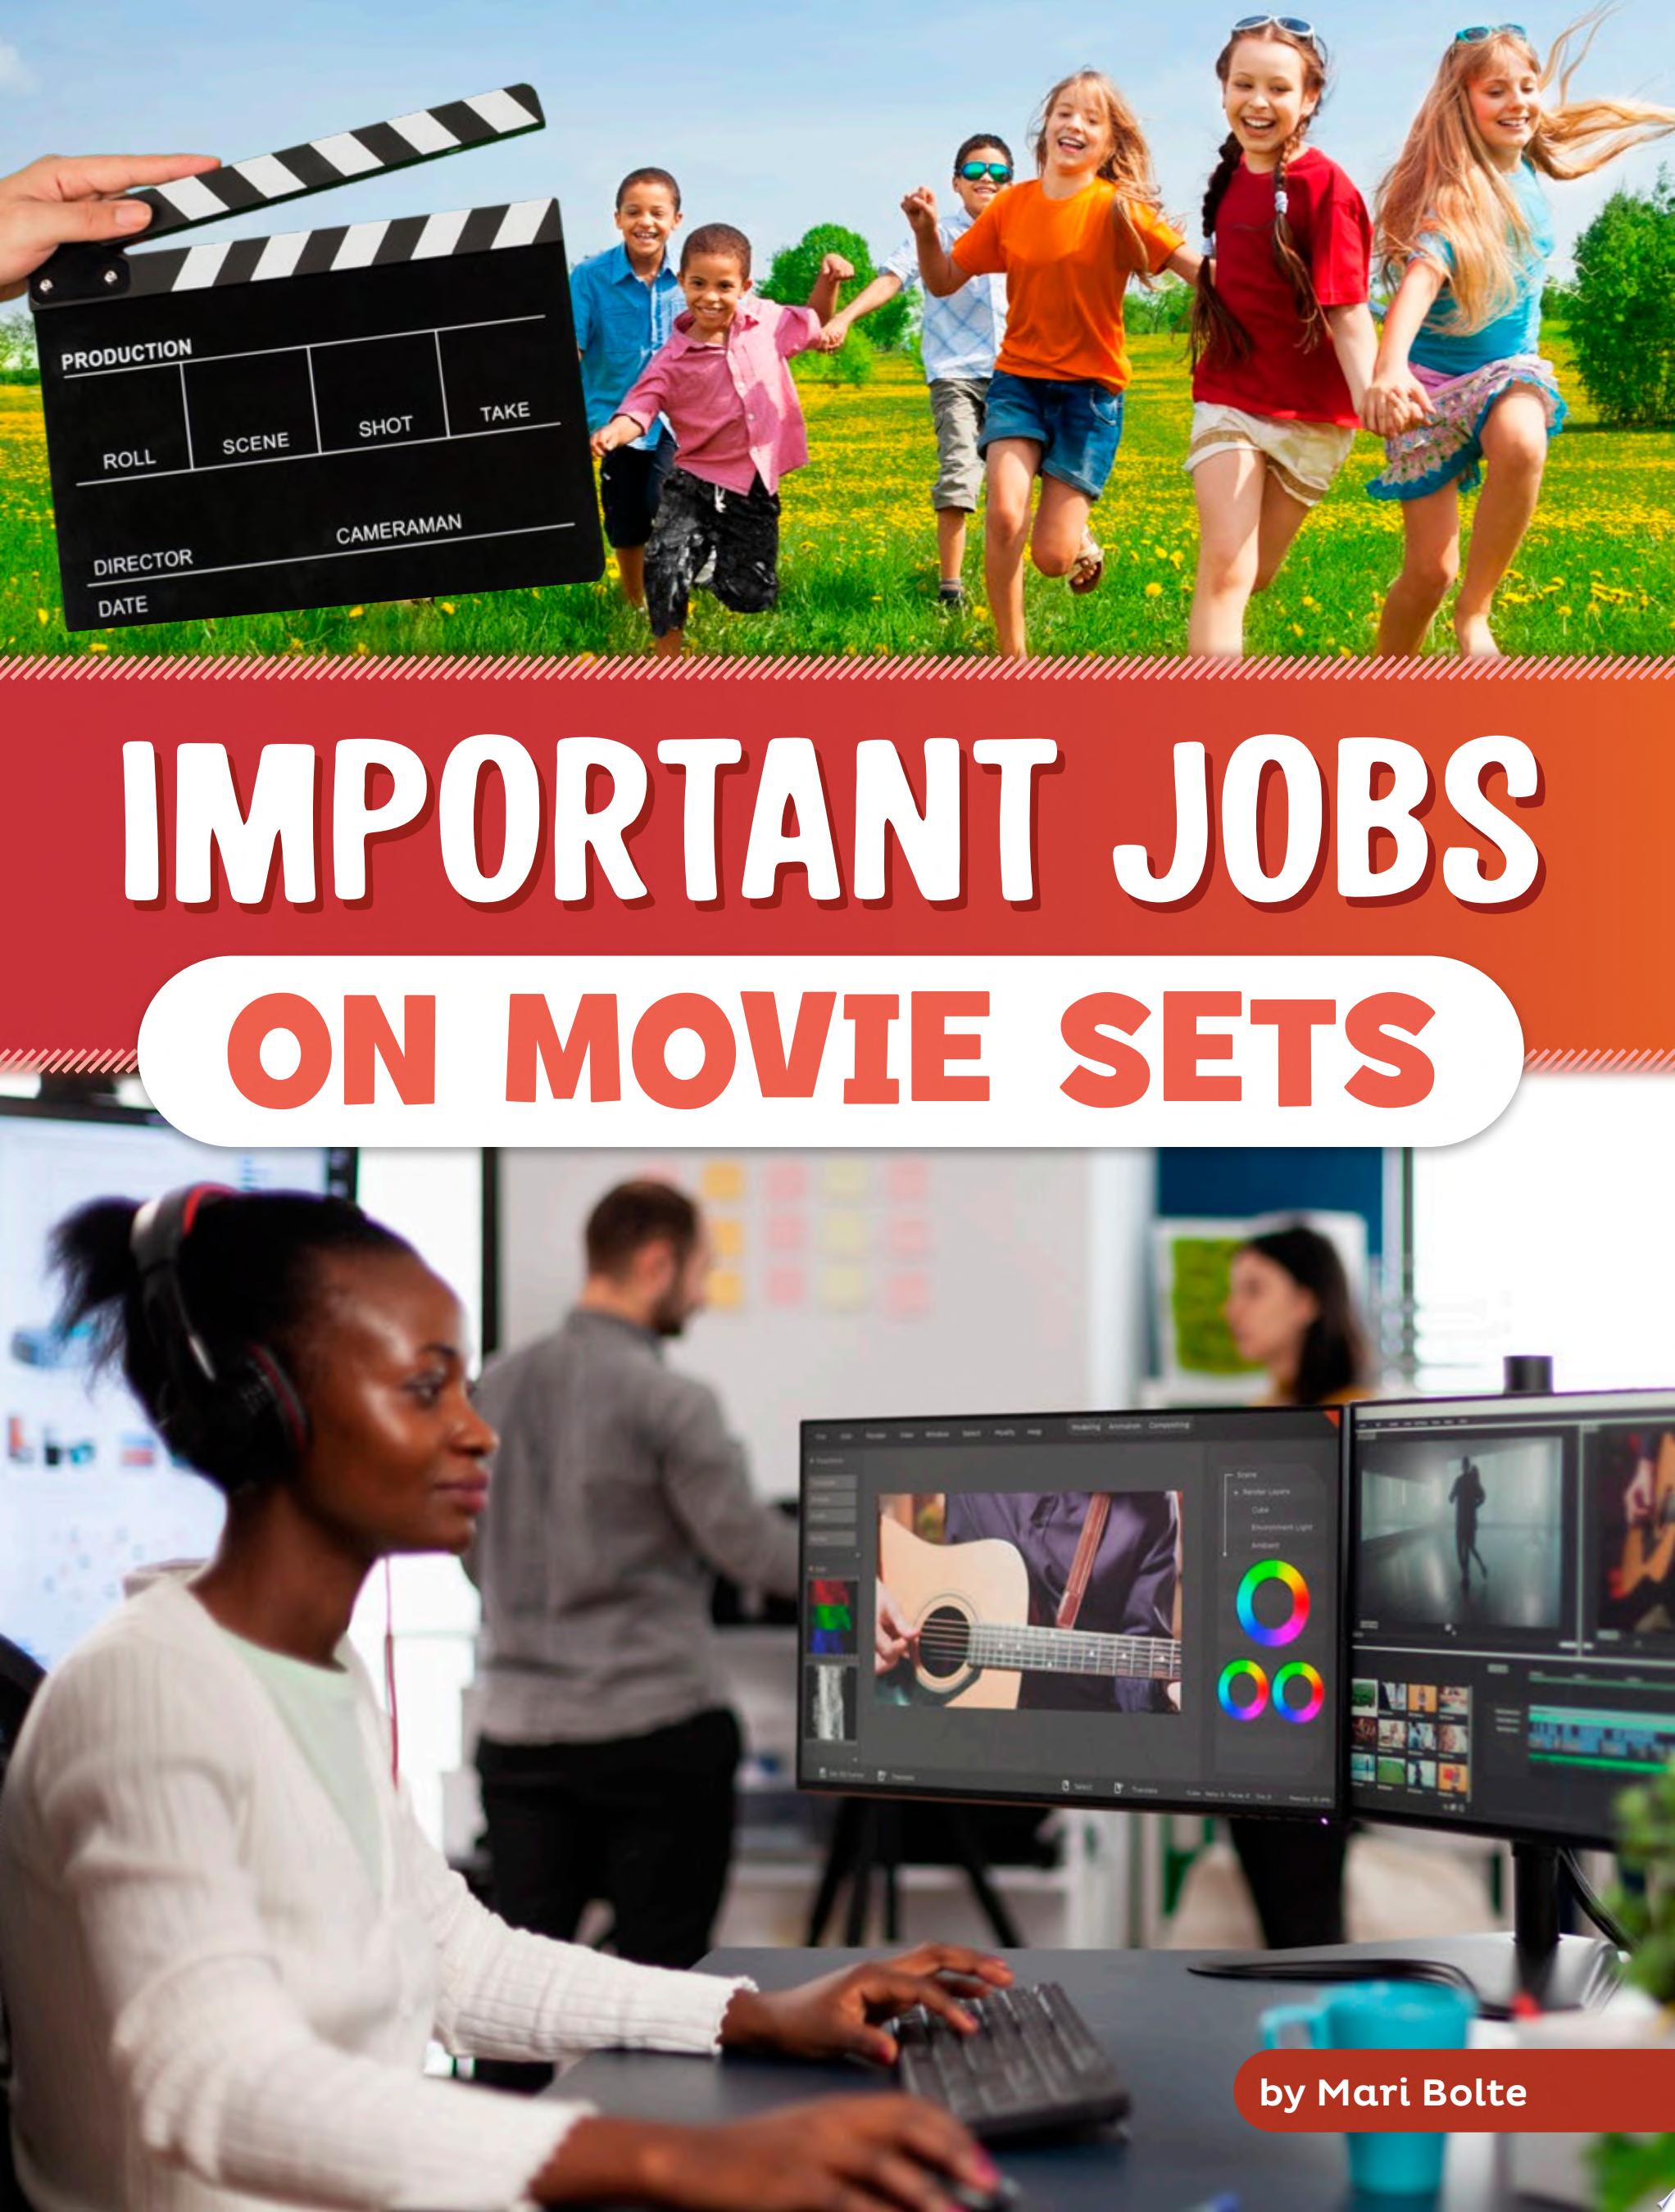 Image for "Important Jobs on Movie Sets"